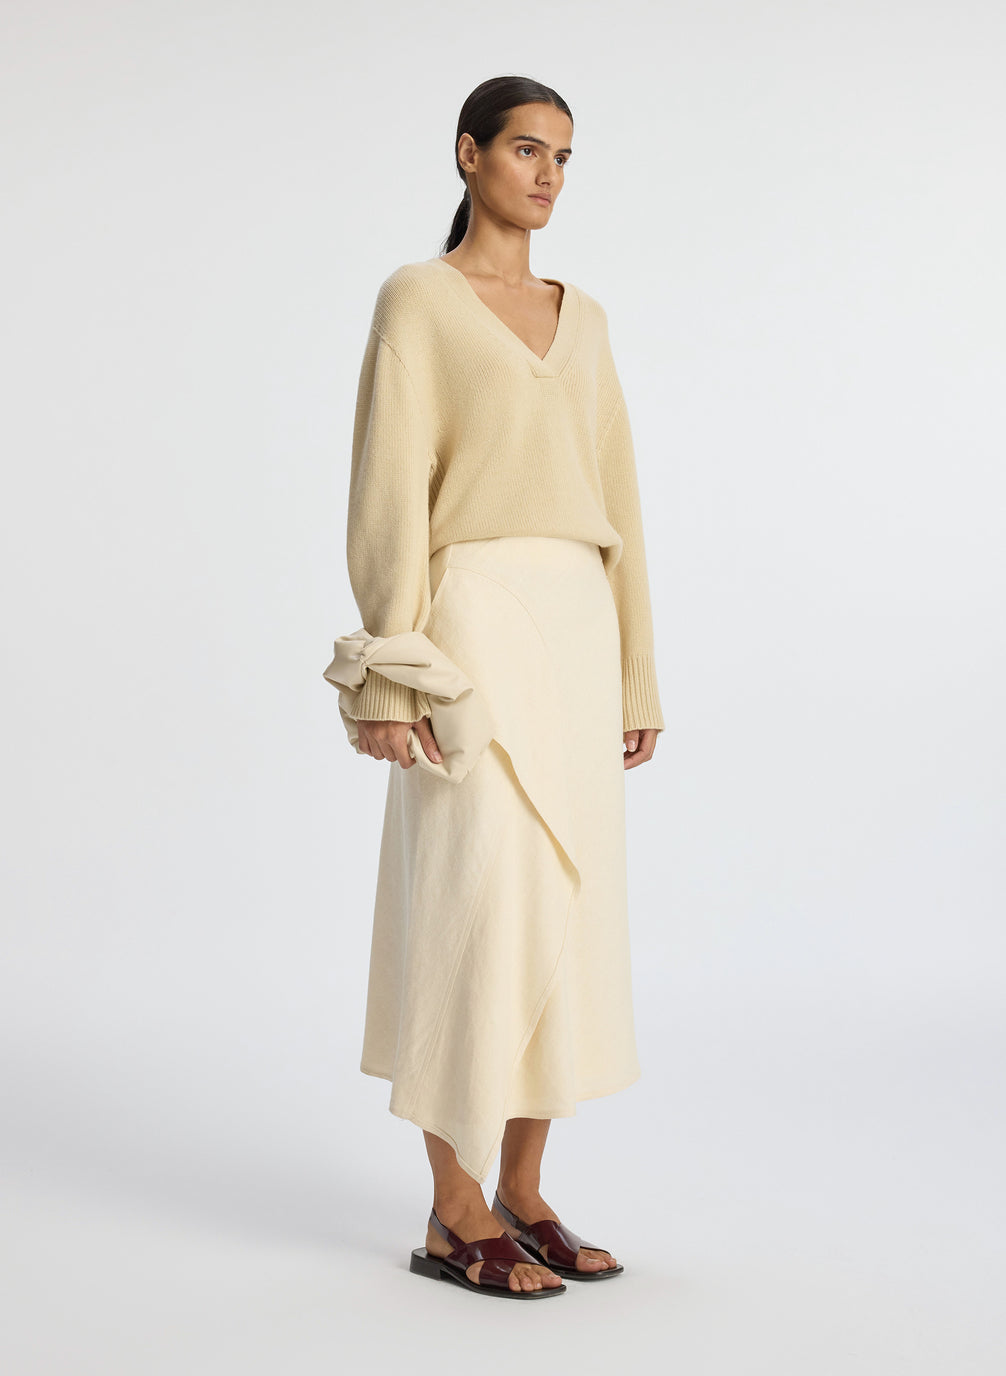 side view of woman wearing beige v neck sweater and cream skirt